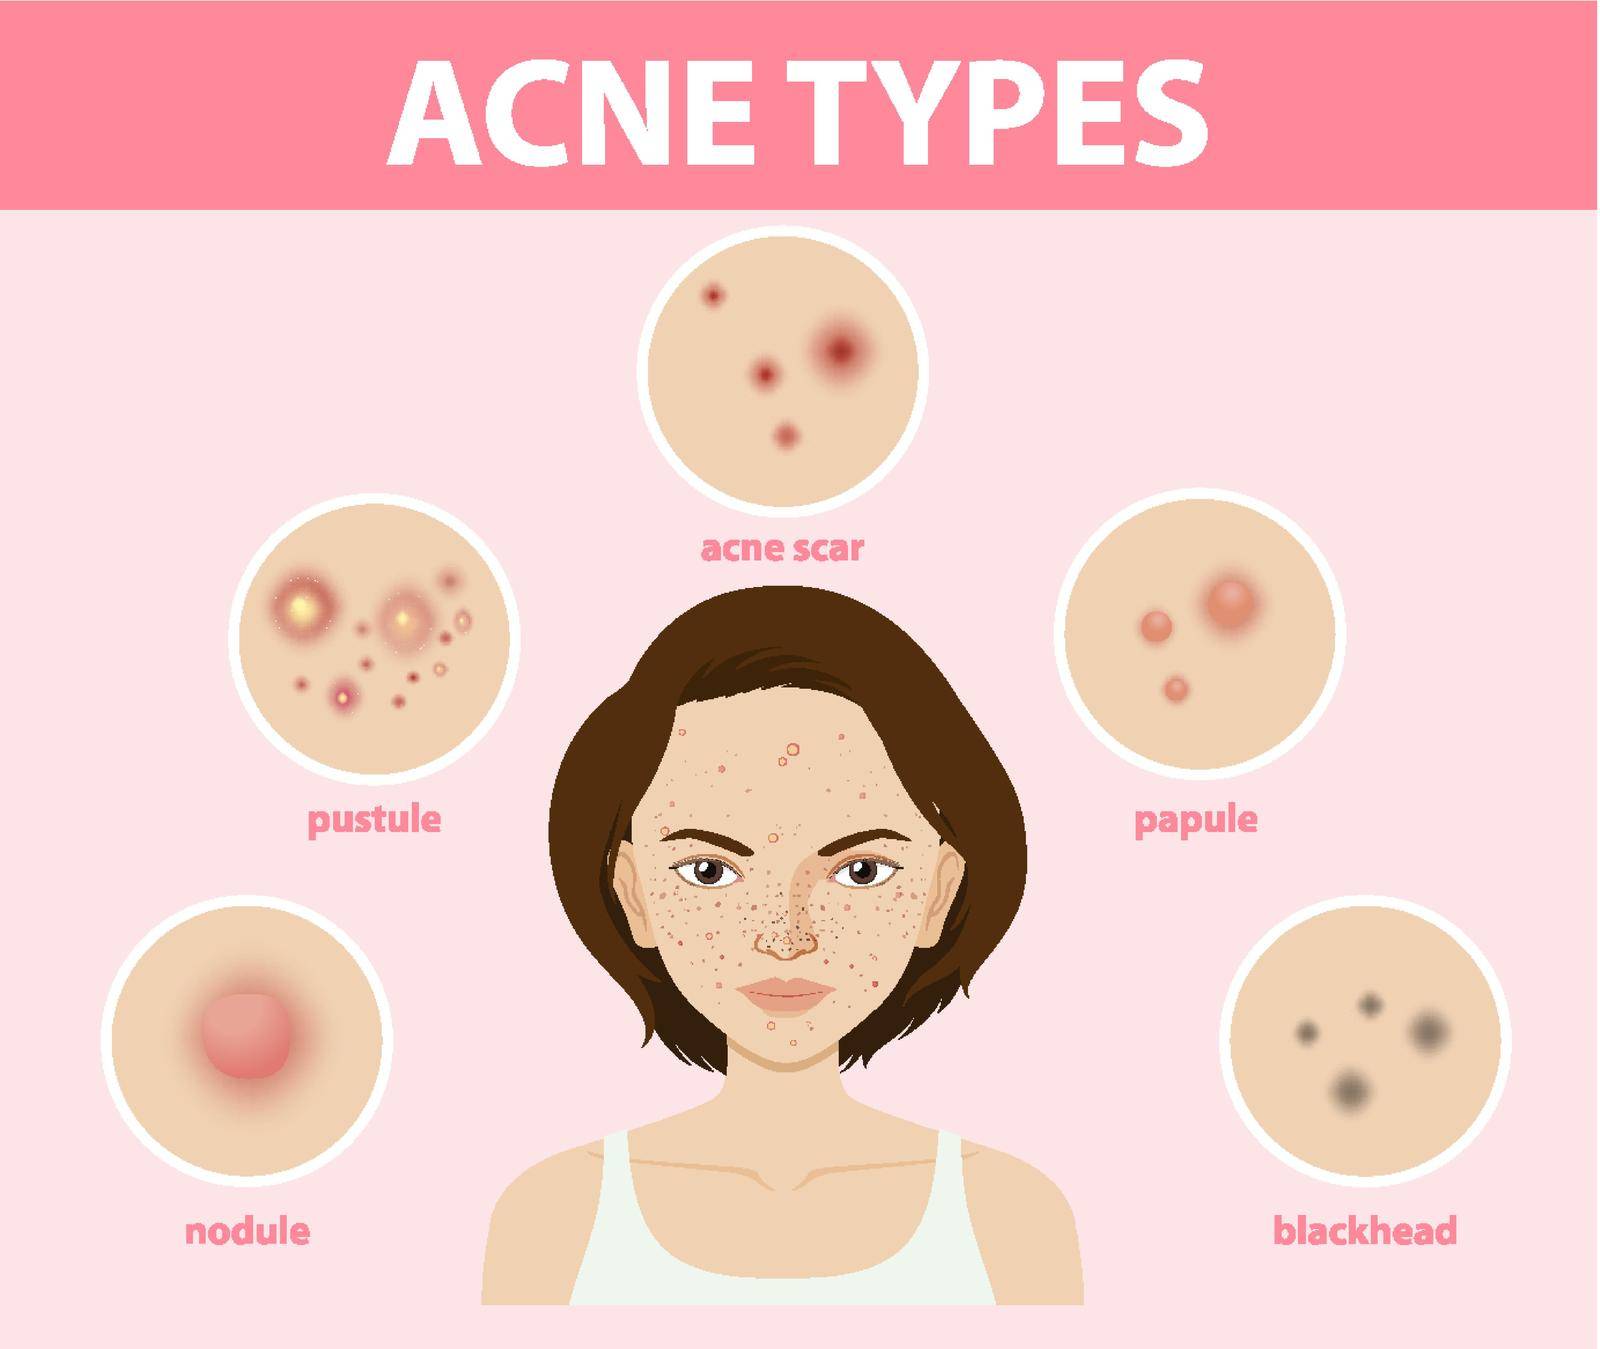 Types of acne on the skin or pimples illustration